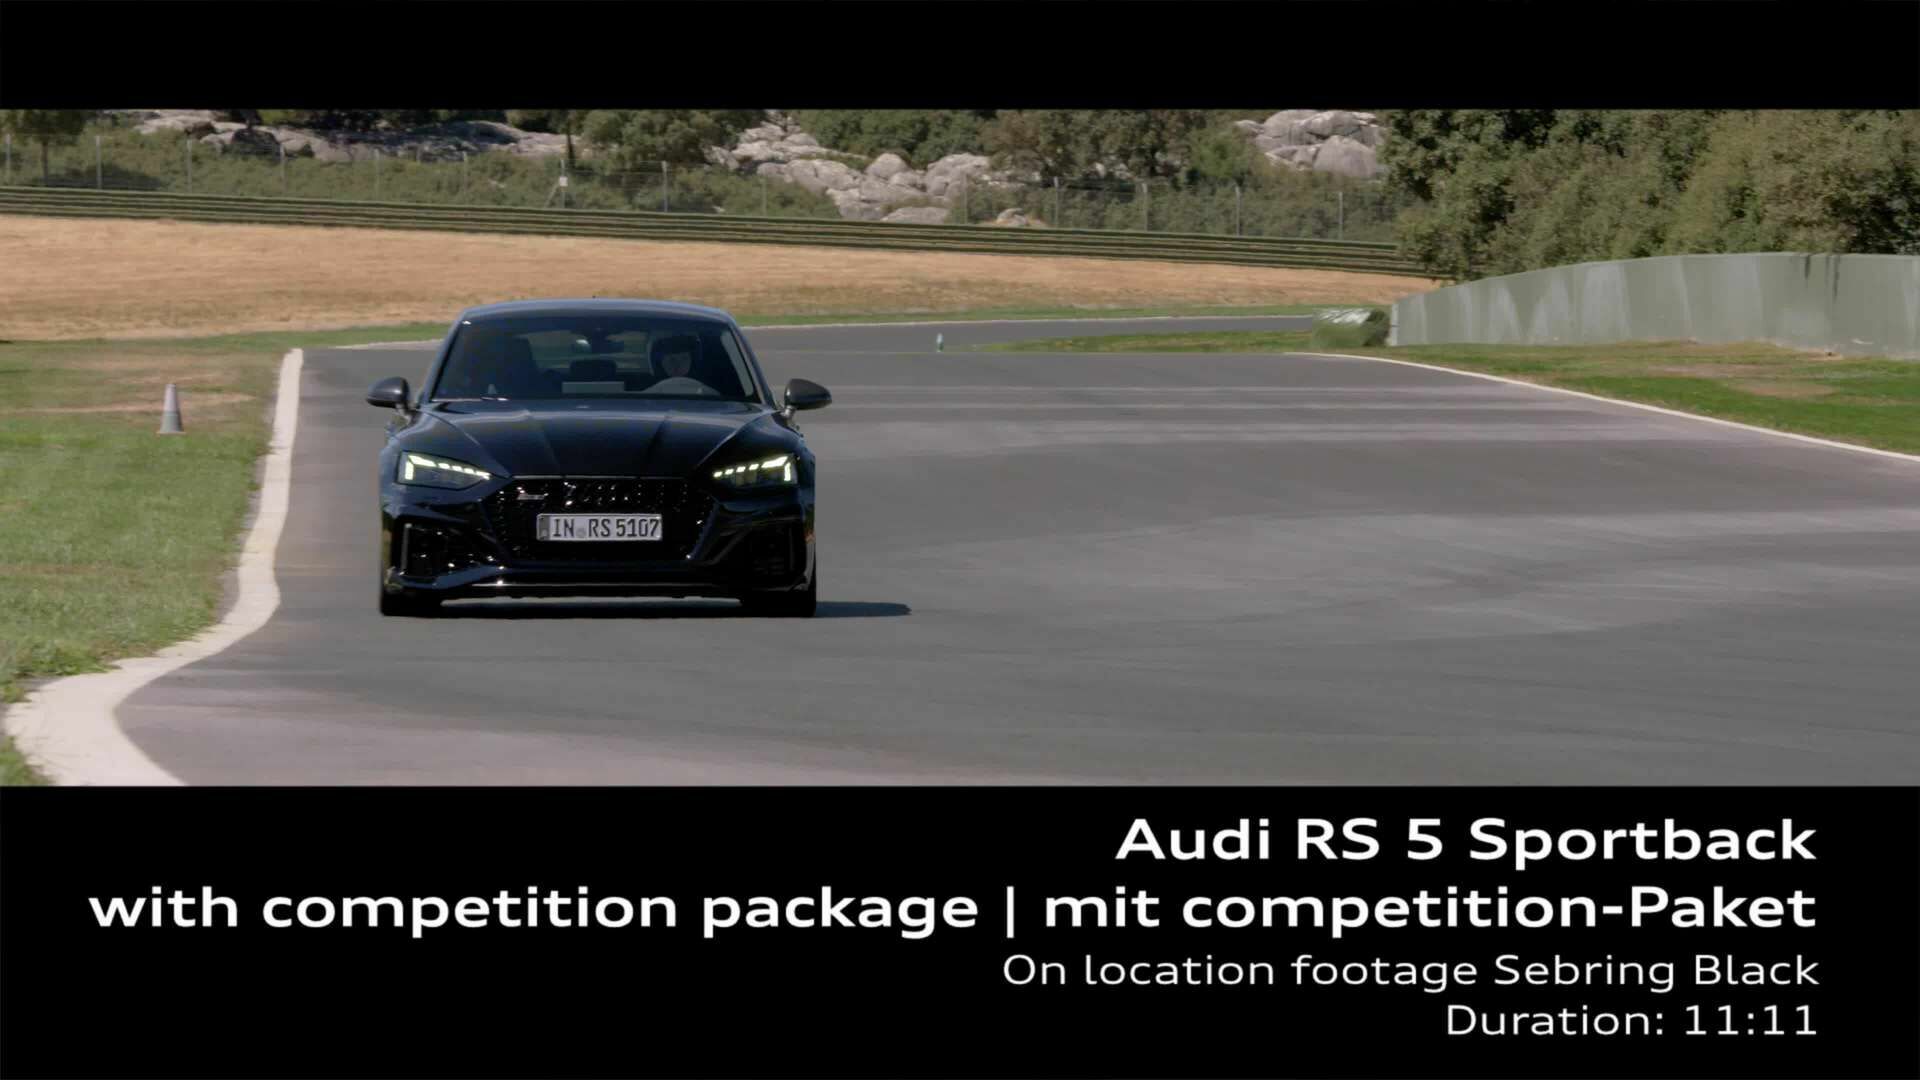 Footage: Audi RS 5 Sportback with competition plus package